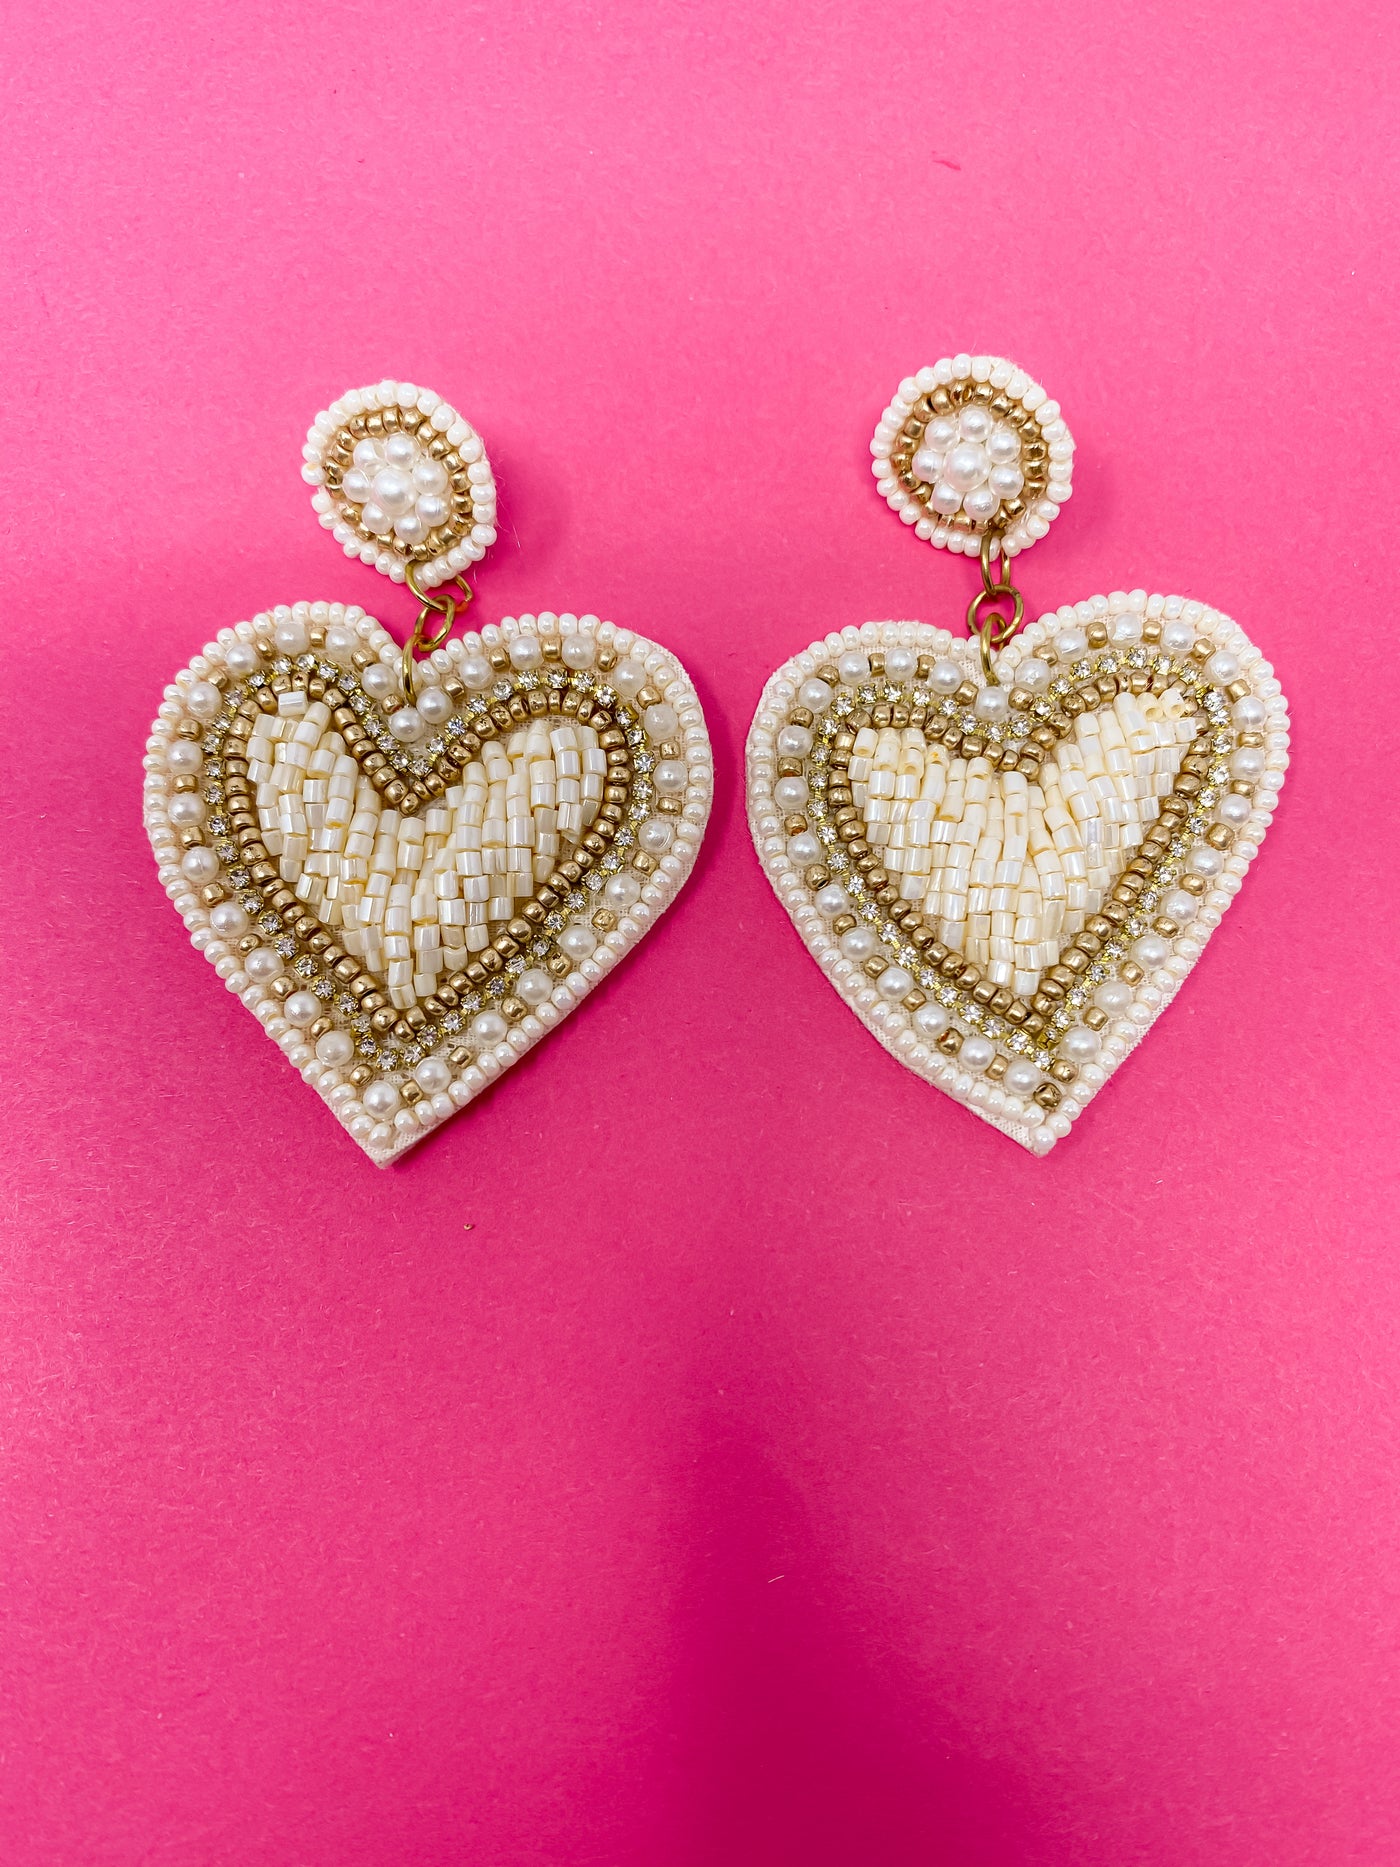 Heart with Pearls Earrings - Cream